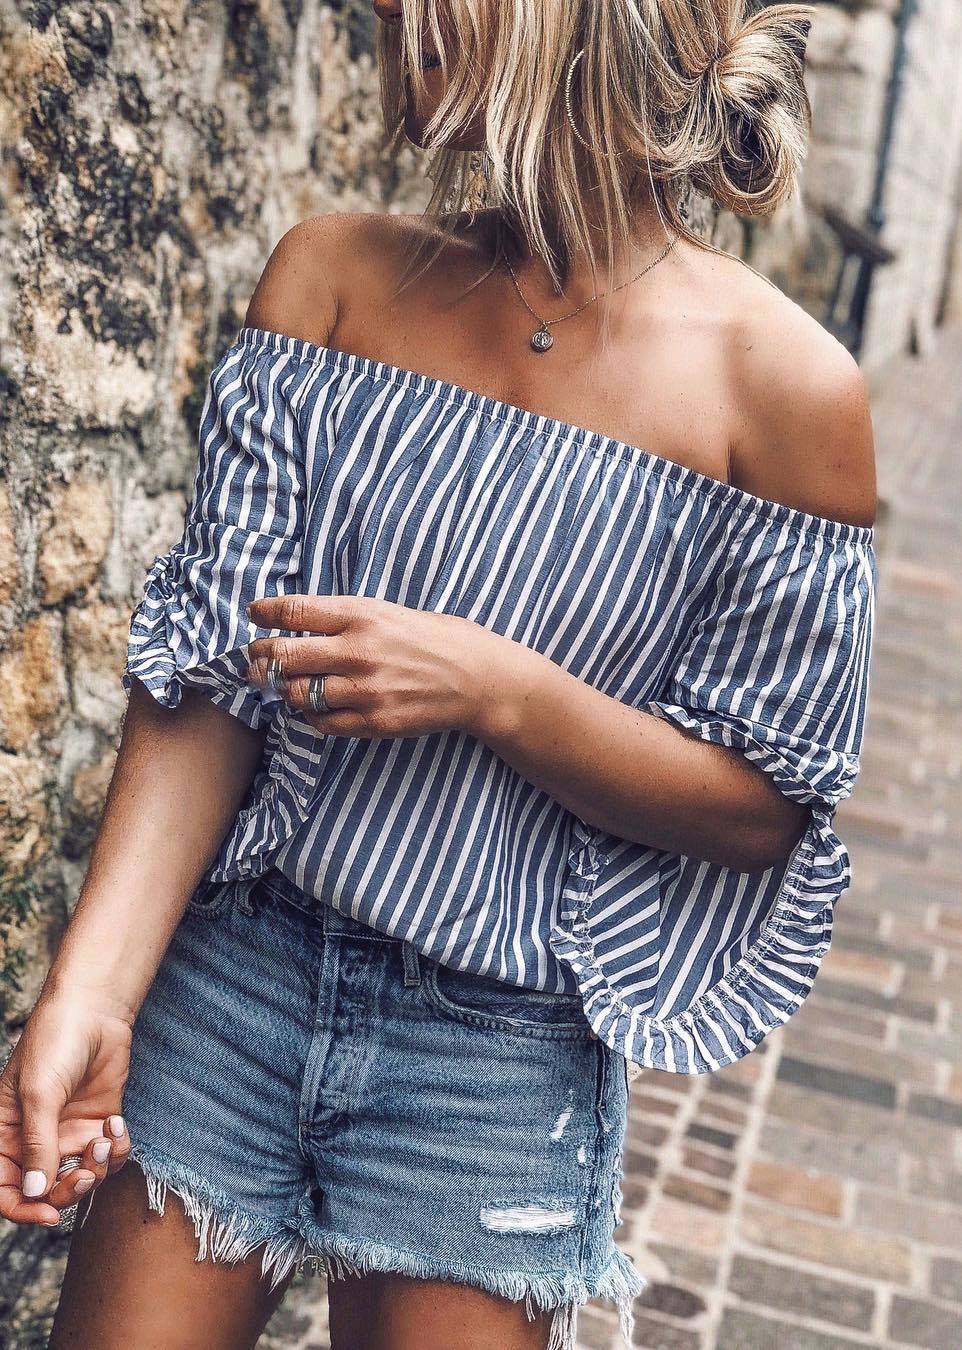 cute summer outfit idea / striped off shoulder top and shorts